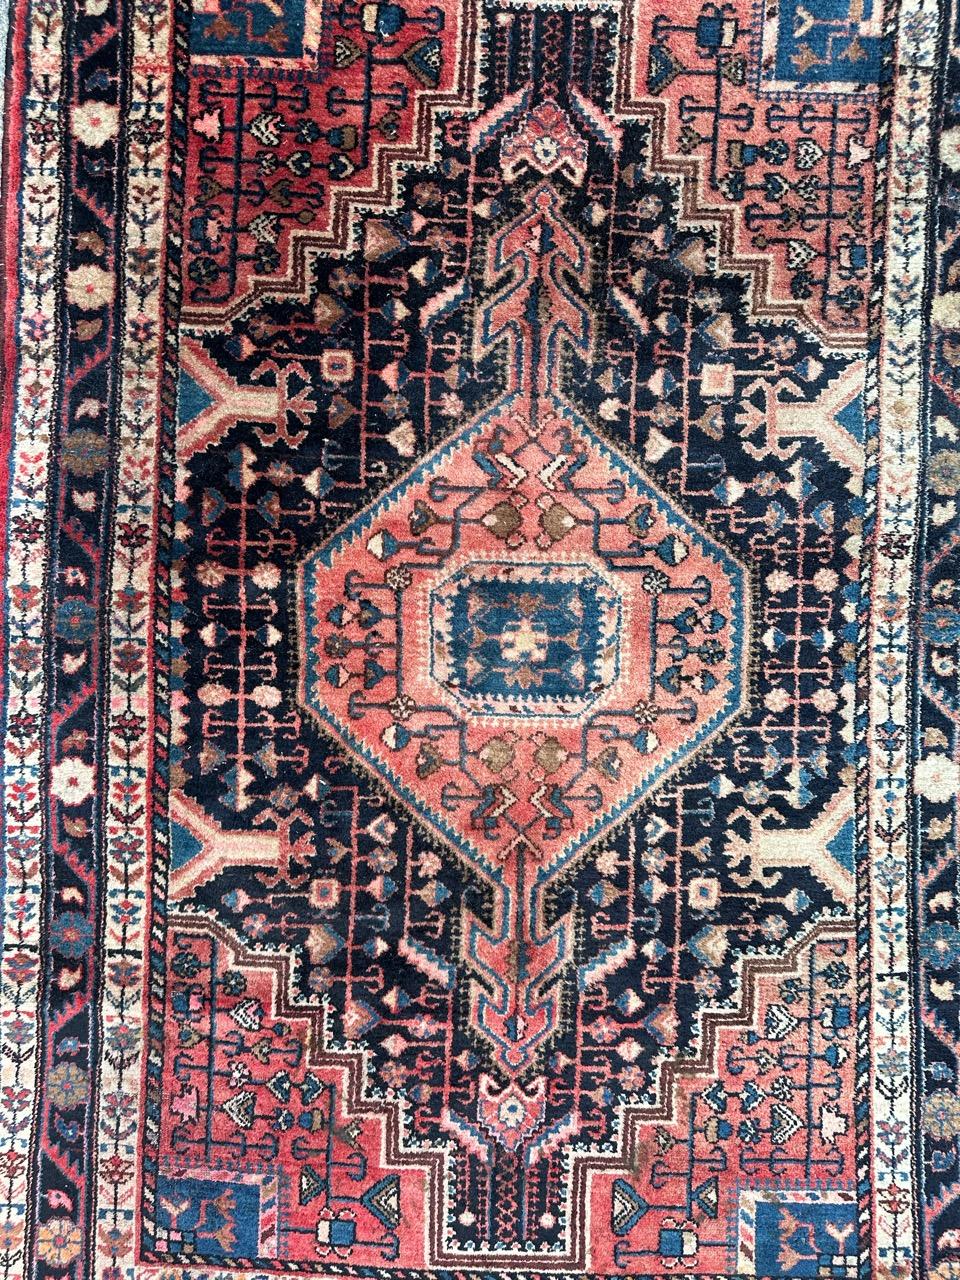 Beautiful mid-20th century Hamadan rug, entirely handwoven in wool on a cotton foundation. Featuring intricate geometric and stylized patterns in lovely colors. The deep blue field of the rug is adorned with a large rosy-red medallion, enclosing a